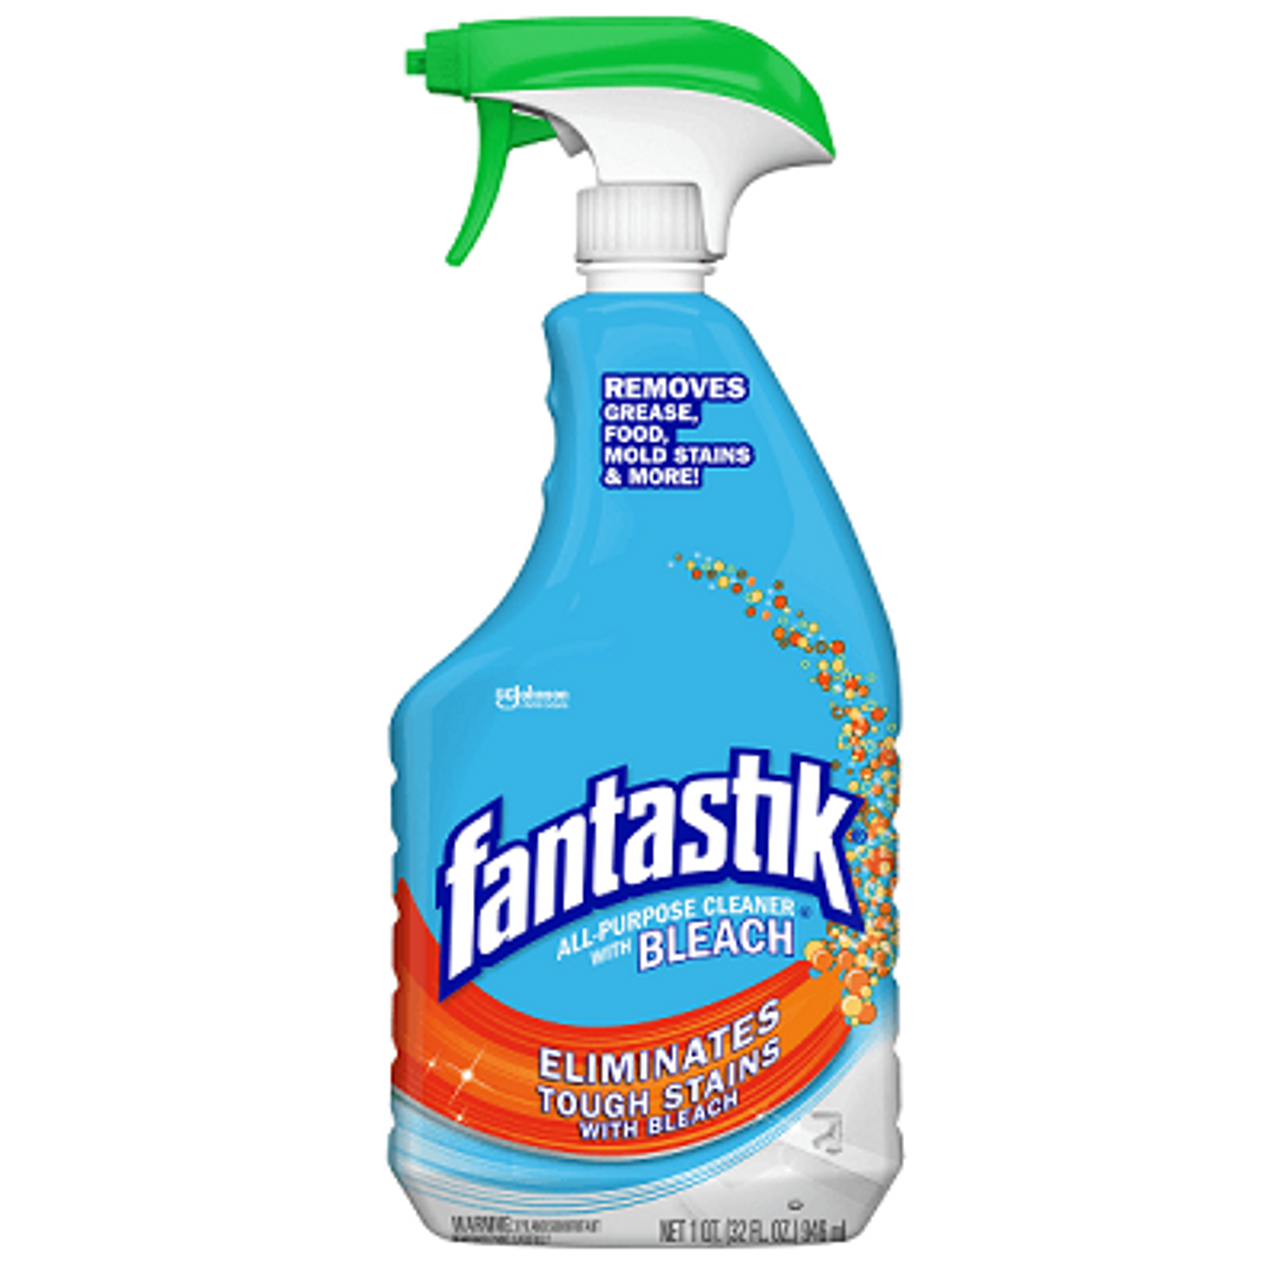 Fantastik All-Purpose Cleaner with Bleach